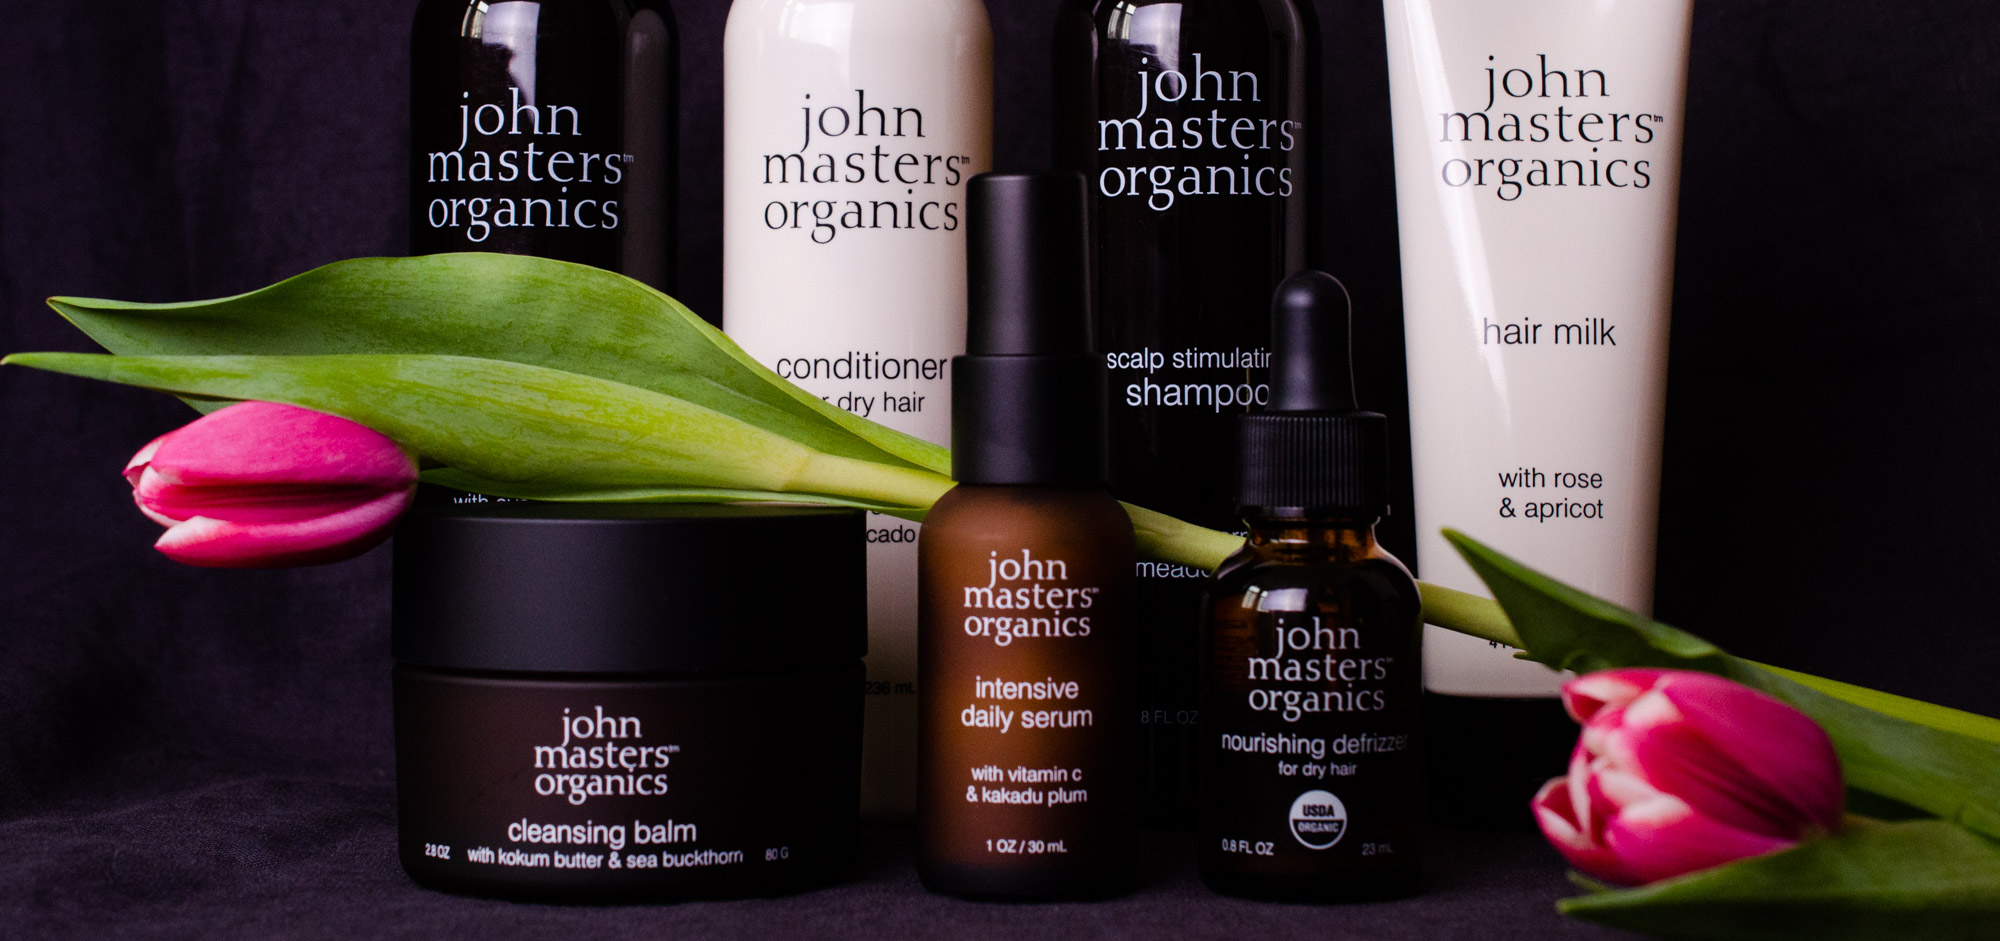 Korn Repaste Lamme John Masters Organics: brand review – Natural Beauty with Baby